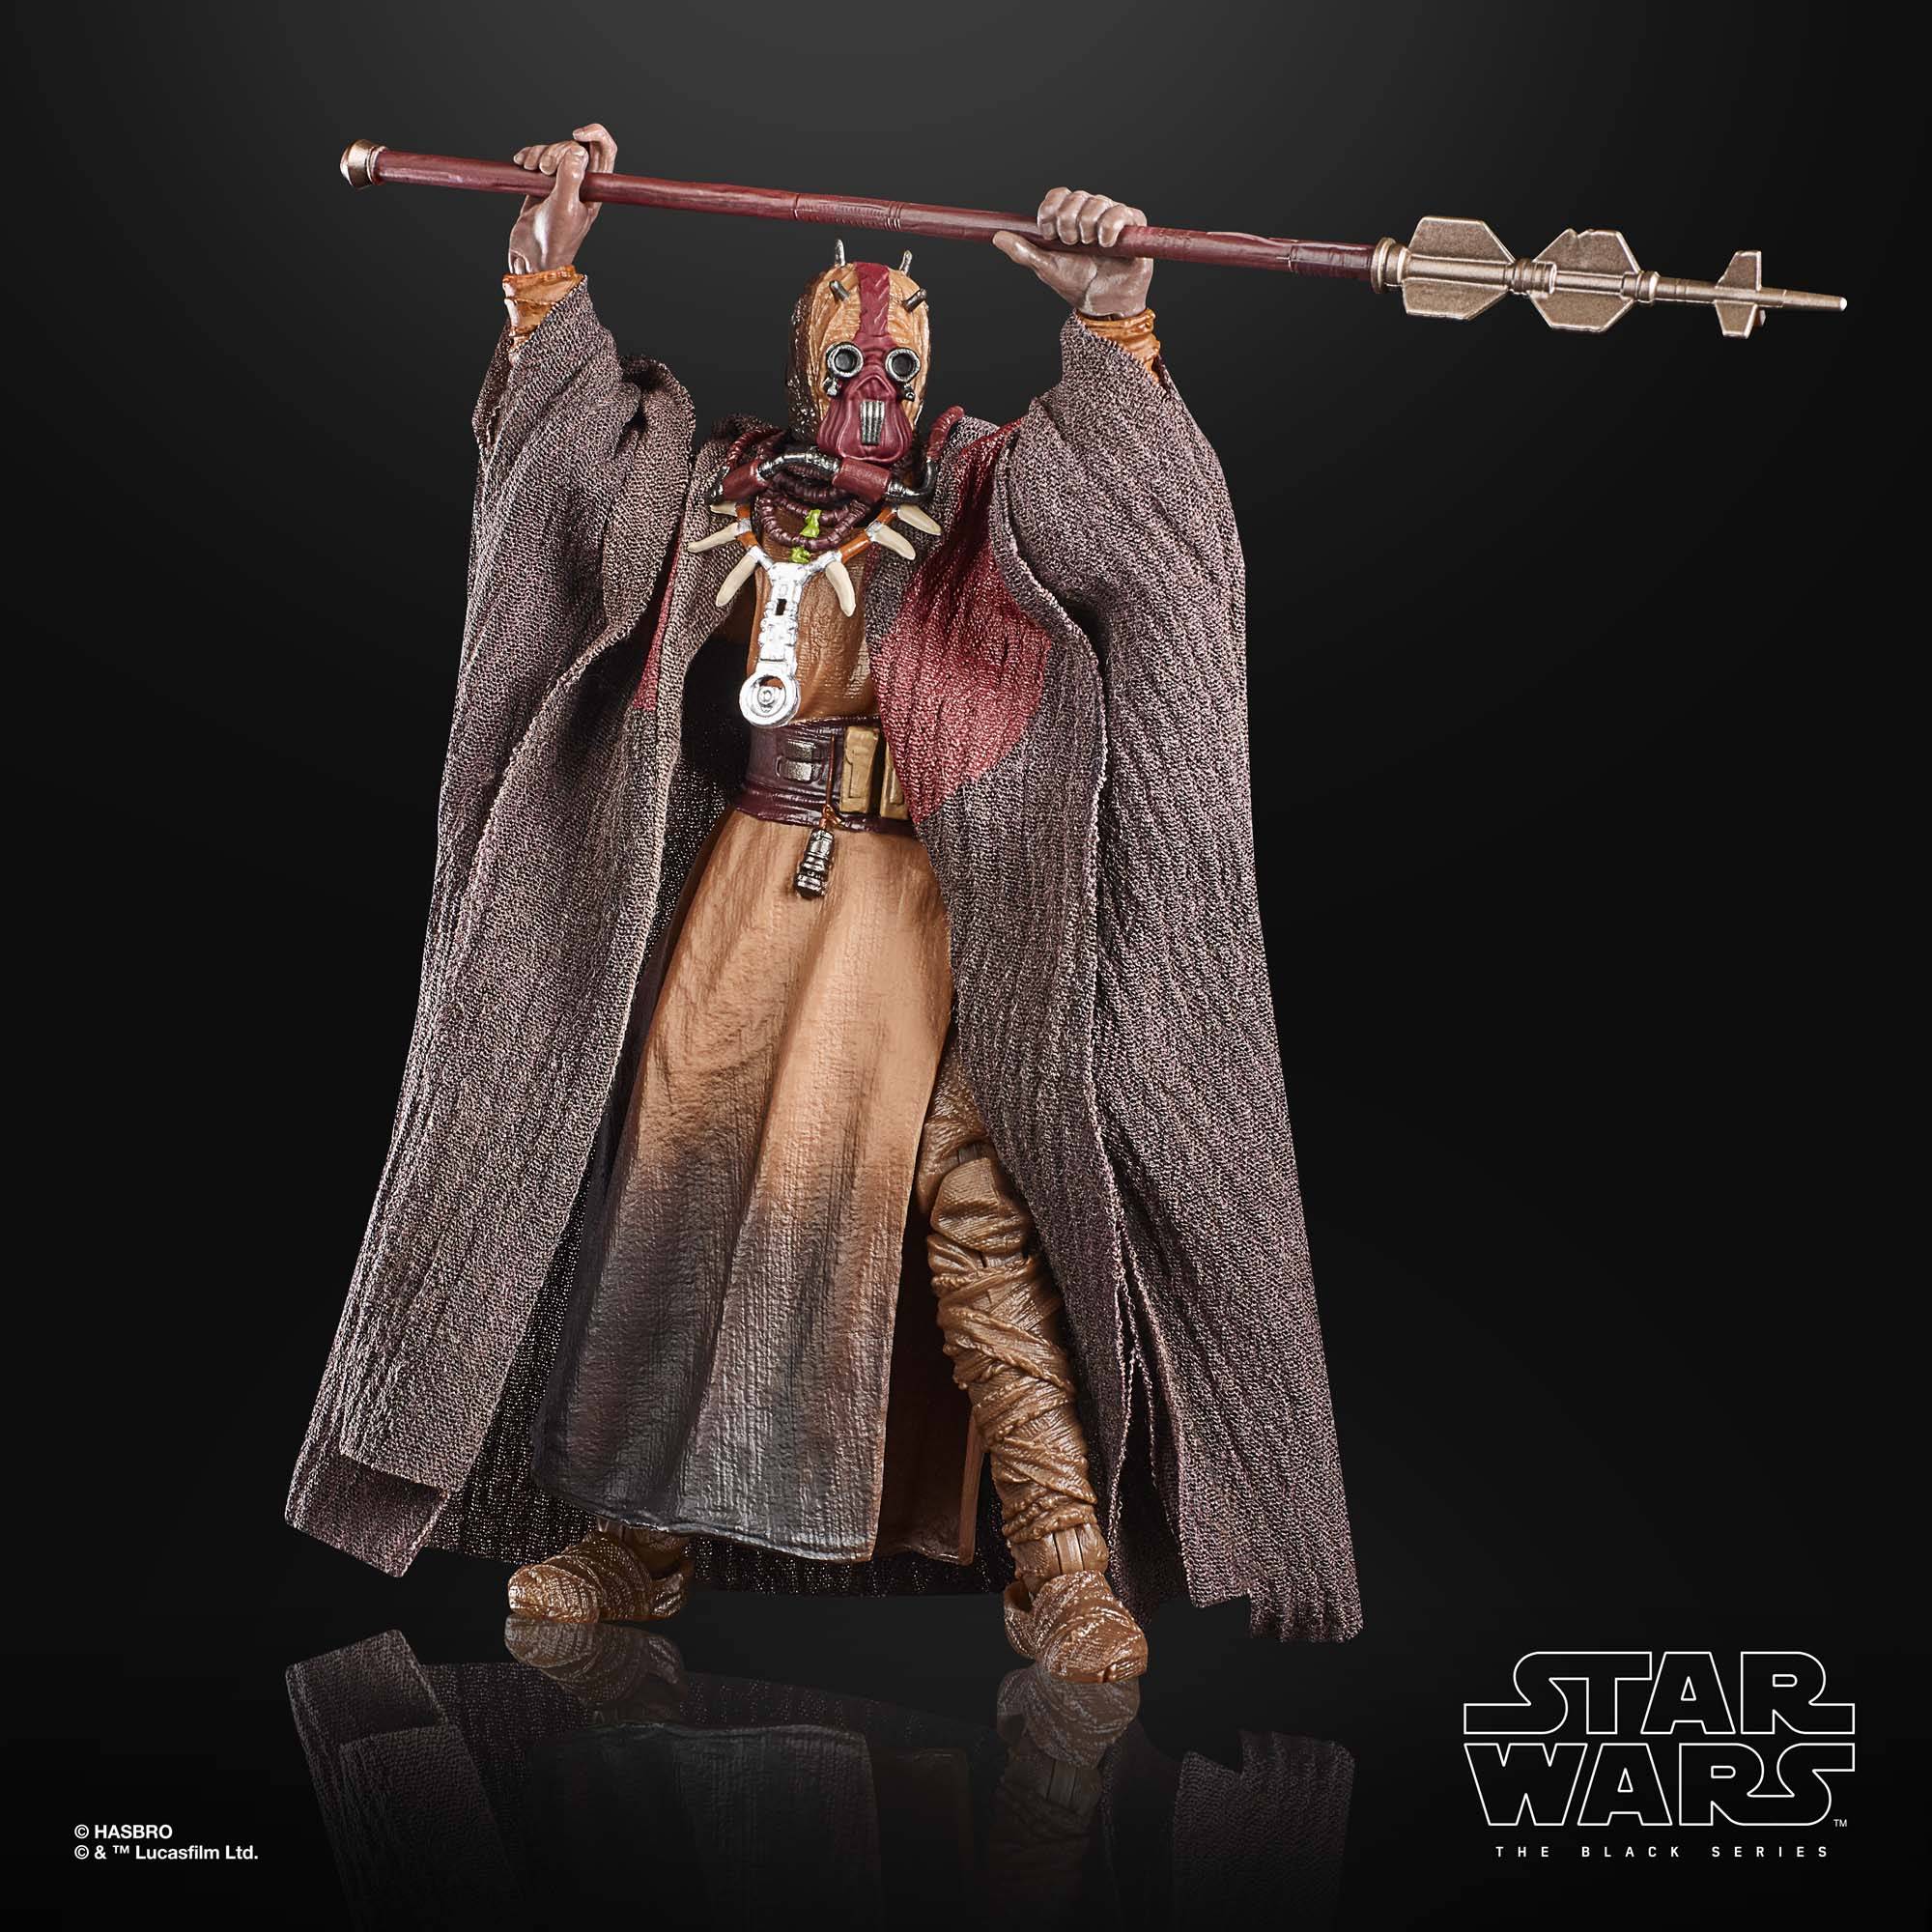 Star Wars Vintage Collection and Black Series: New Tusken Raider figures revealed